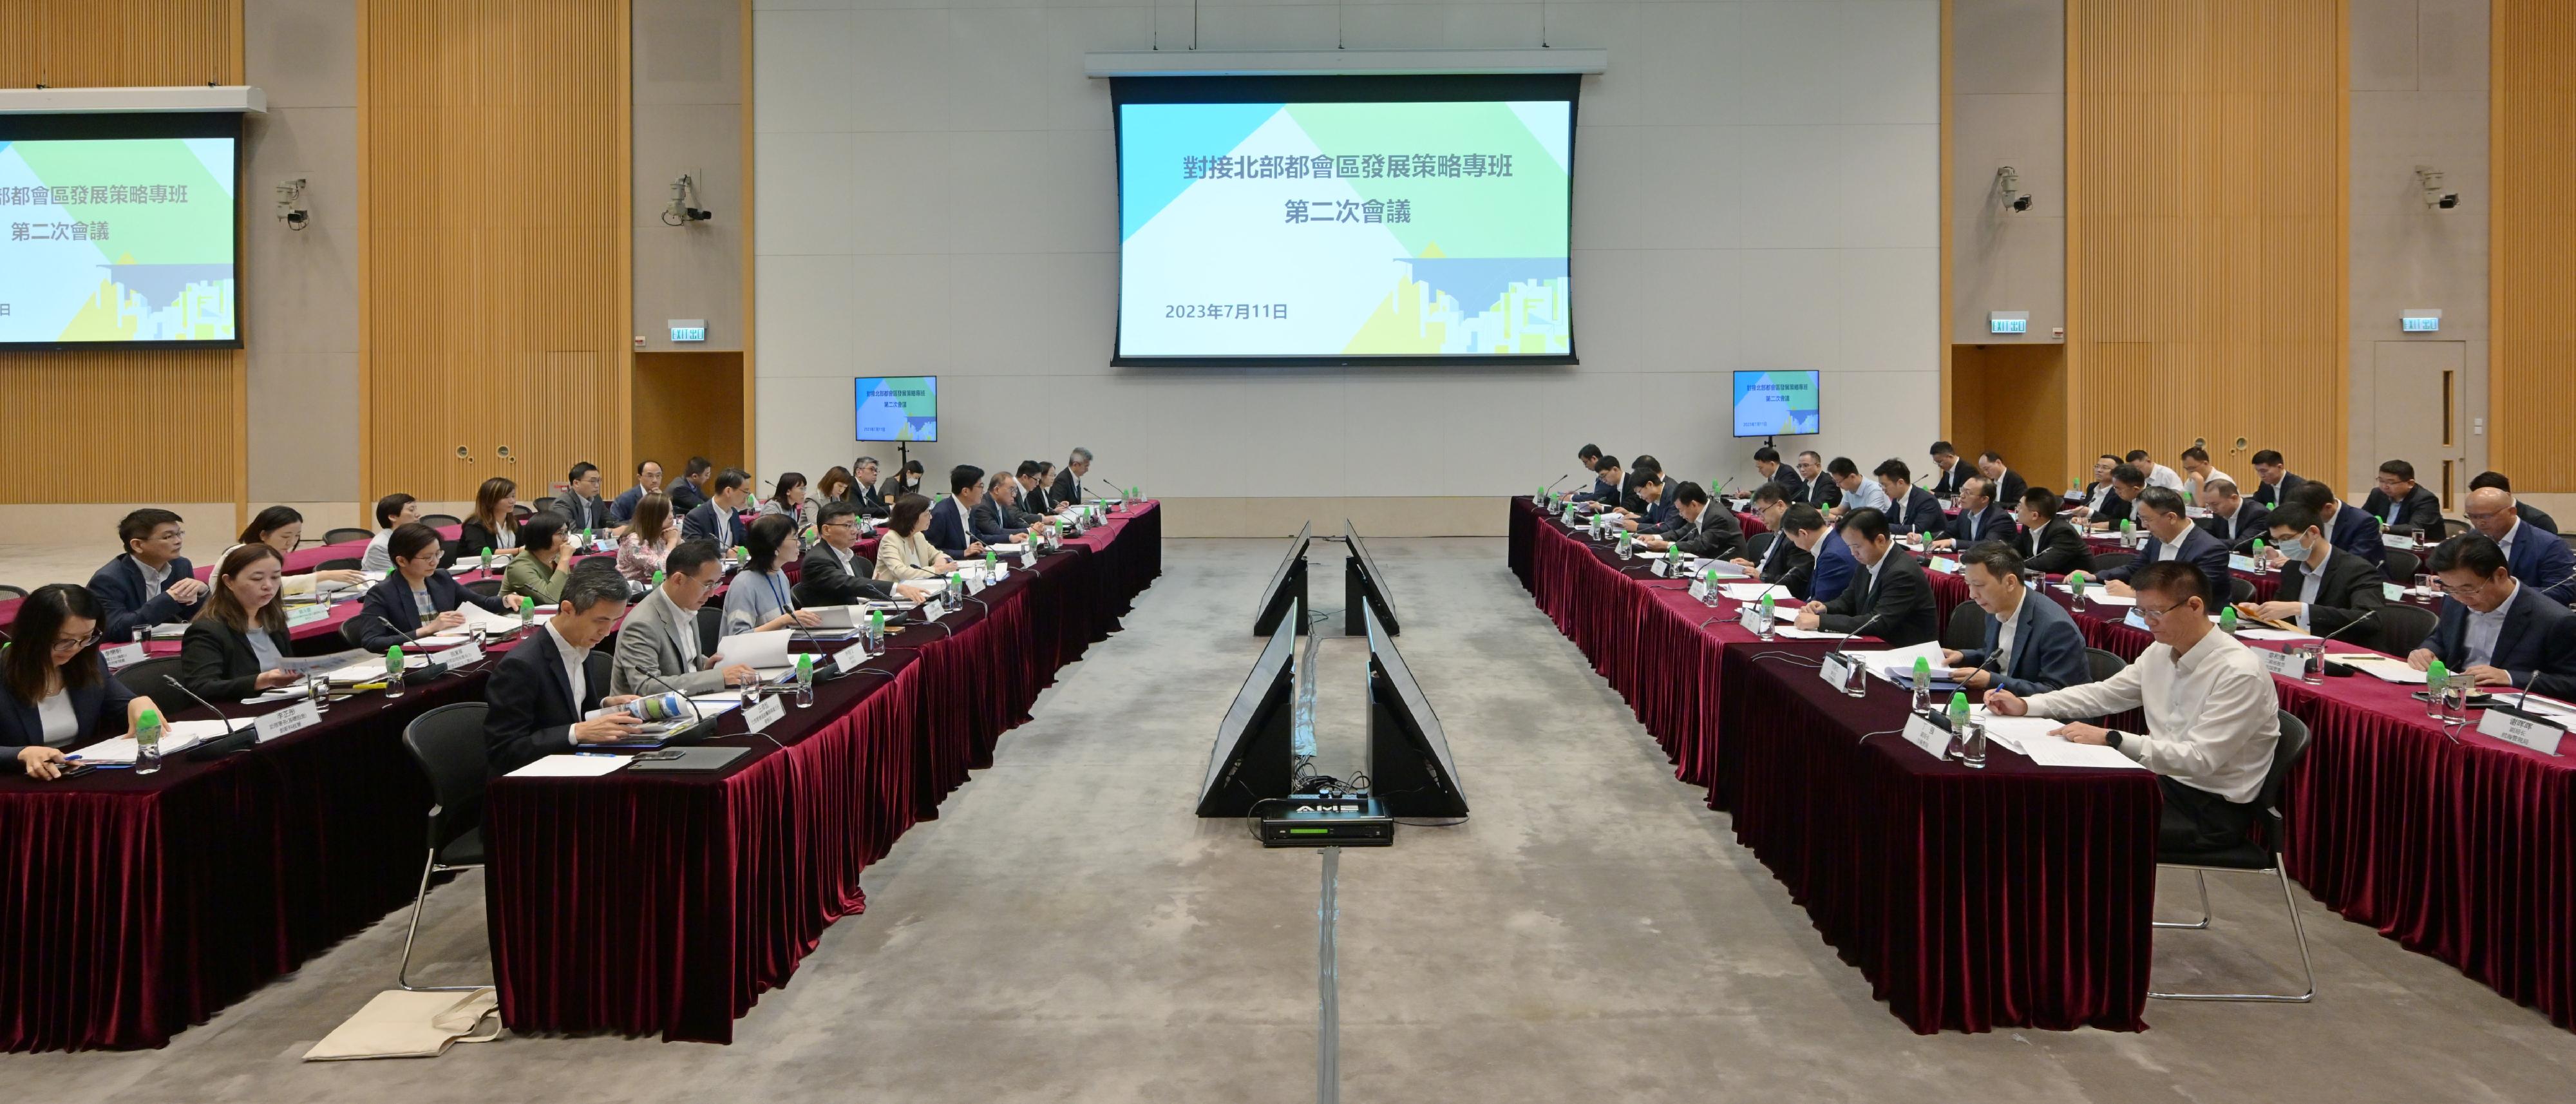 The Deputy Financial Secretary, Mr Michael Wong, and Vice Mayor of Shenzhen Municipal People's Government Mr Huang Min, leading delegations of the governments of the Hong Kong Special Administrative Region and Shenzhen respectively, held the second meeting of the Task Force for Collaboration on the Northern Metropolis Development Strategy in Hong Kong today (July 11).